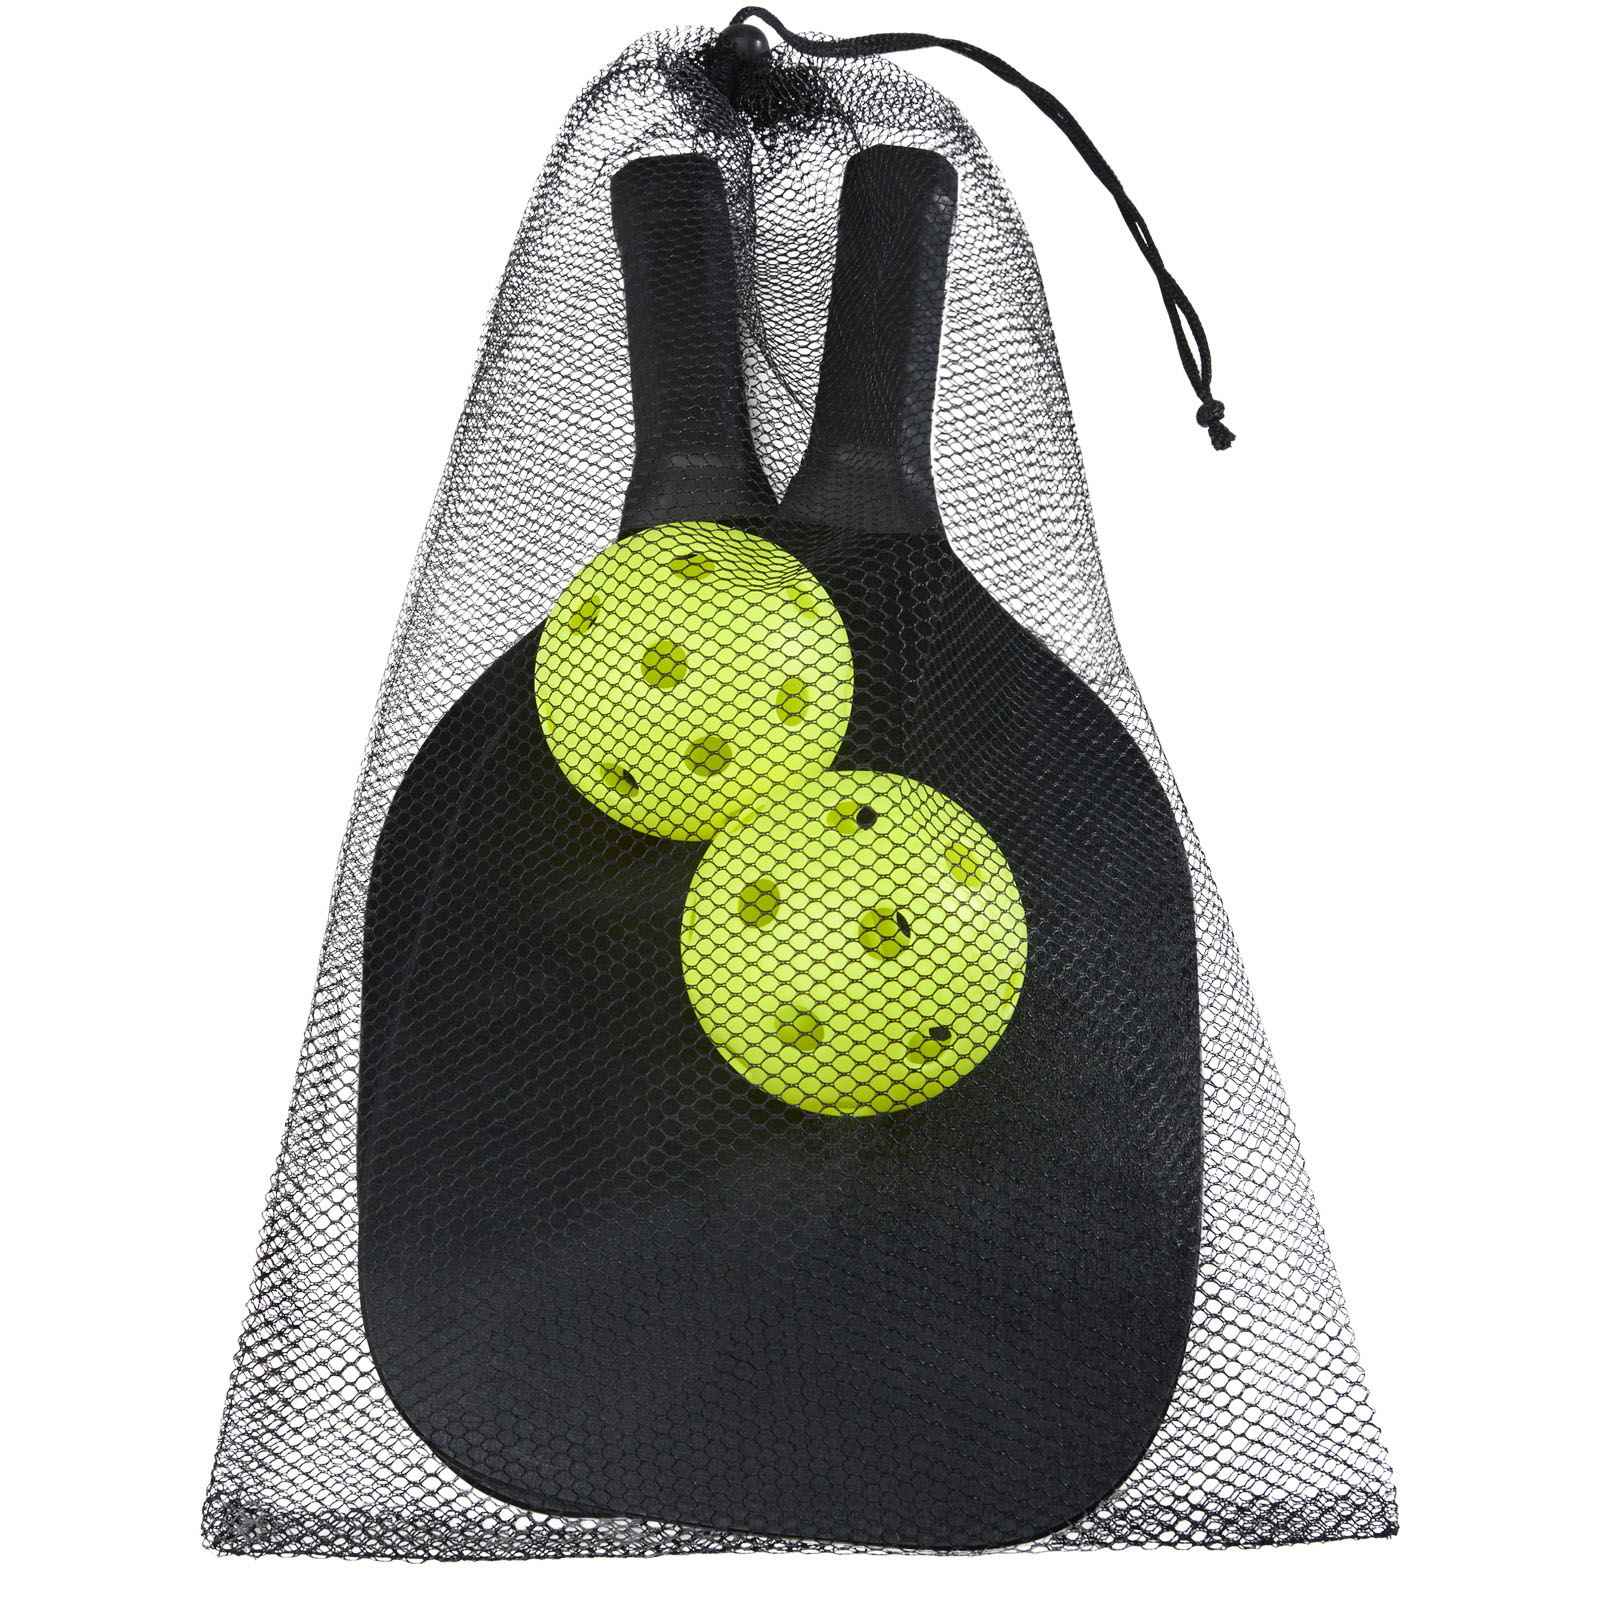 Advertising Outdoor Games - Enrique paddle set in mesh pouch - 1